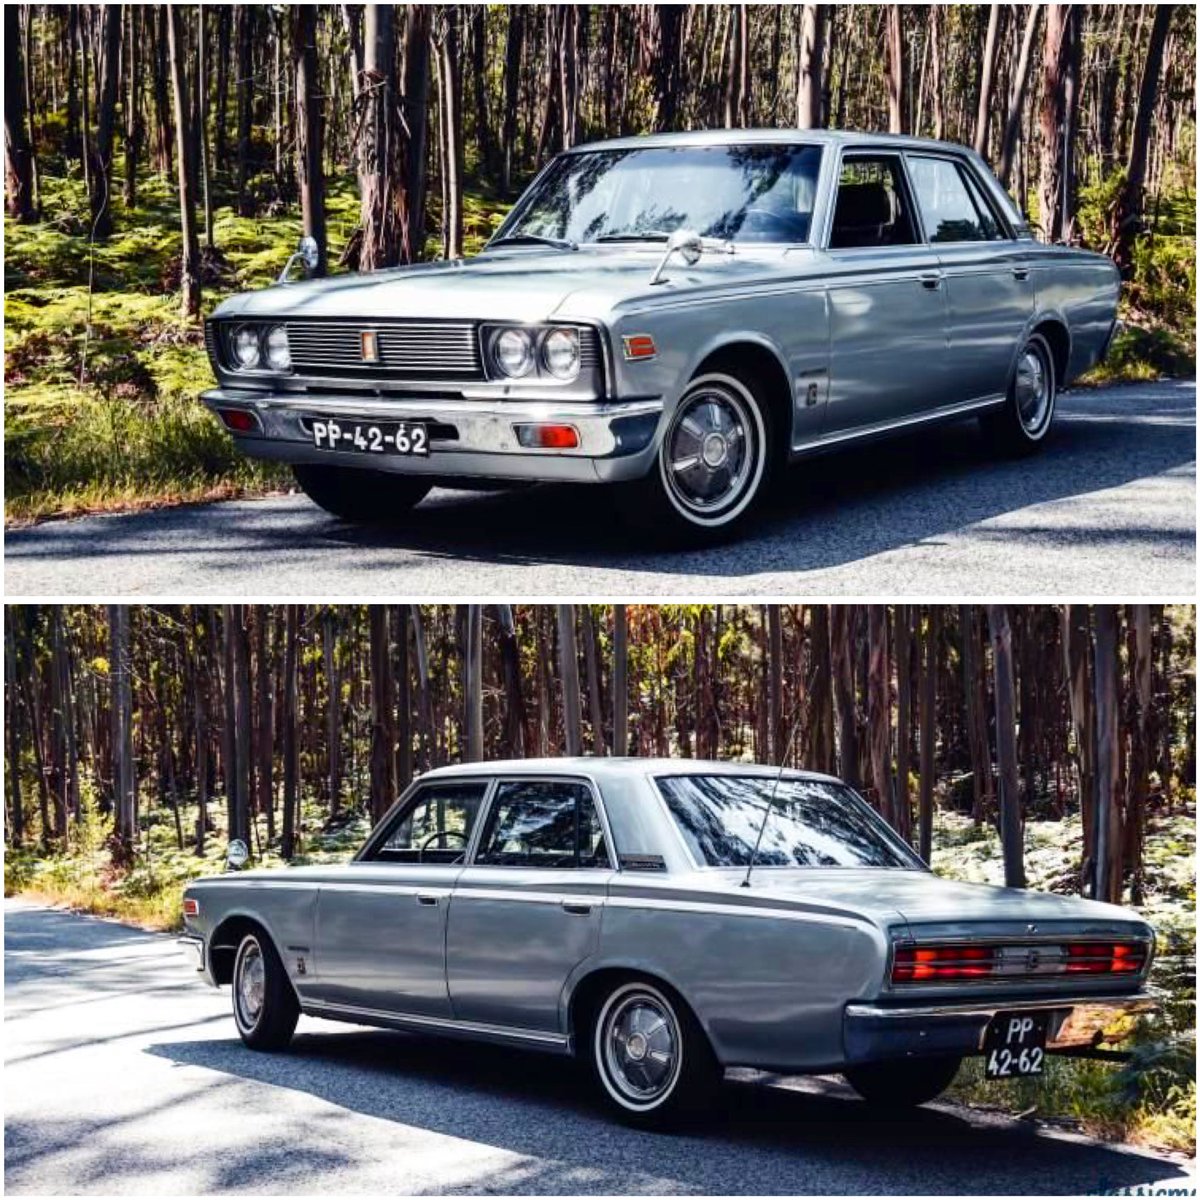 Here’s a rare beast for this week’s #ThrowbackThursday, a stunning Toyota Crown Super Deluxe from 1970.

#Toyota #ToyotaCrown